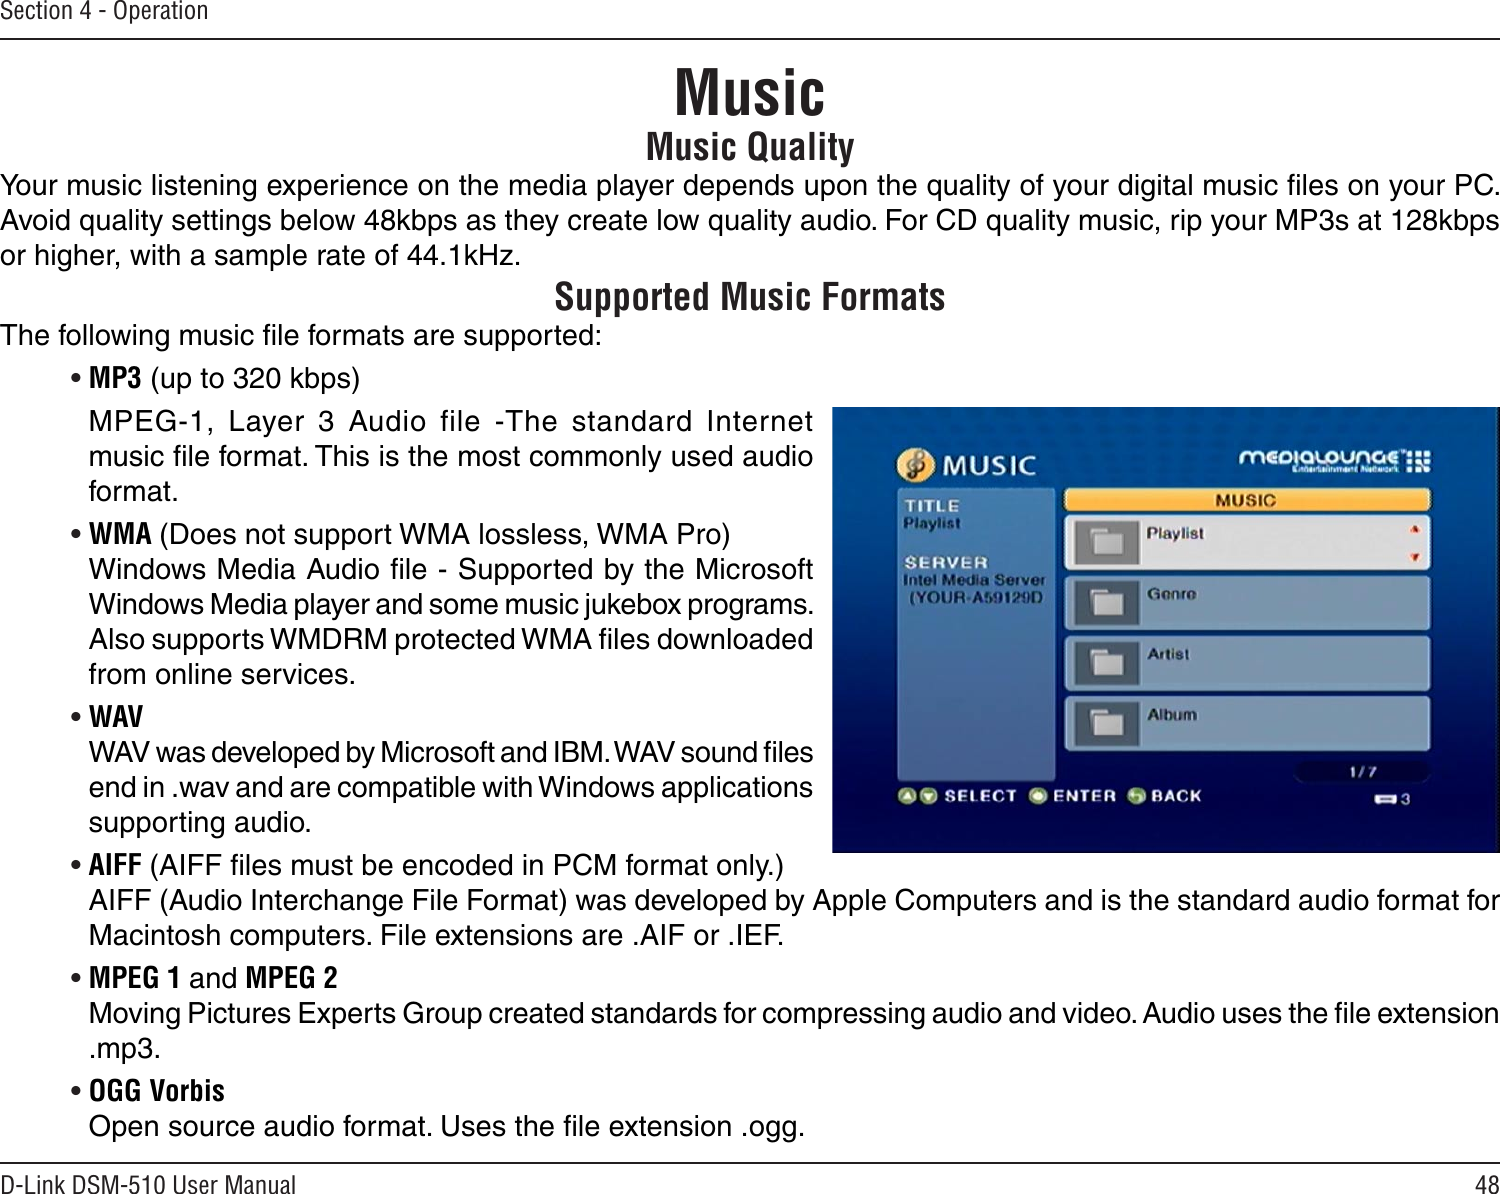 48D-Link DSM-510 User ManualSection 4 - OperationMusic QualityYour music listening experience on the media player depends upon the quality of your digital music ﬁles on your PC. Avoid quality settings below 48kbps as they create low quality audio. For CD quality music, rip your MP3s at 128kbps or higher, with a sample rate of 44.1kHz.Supported Music FormatsThe following music ﬁle formats are supported:• MP3 (up to 320 kbps)MPEG-1,  Layer  3  Audio  file  -The  standard  Internet music ﬁle format. This is the most commonly used audio format.• WMA (Does not support WMA lossless, WMA Pro)   Windows Media Audio ﬁle - Supported by the Microsoft Windows Media player and some music jukebox programs. Also supports WMDRM protected WMA ﬁles downloaded from online services.• WAV  WAV was developed by Microsoft and IBM. WAV sound ﬁles end in .wav and are compatible with Windows applications supporting audio.• AIFF (AIFF ﬁles must be encoded in PCM format only.)  AIFF (Audio Interchange File Format) was developed by Apple Computers and is the standard audio format for Macintosh computers. File extensions are .AIF or .IEF.• MPEG 1 and MPEG 2   Moving Pictures Experts Group created standards for compressing audio and video. Audio uses the ﬁle extension .mp3.• OGG Vorbis   Open source audio format. Uses the ﬁle extension .ogg.  Music